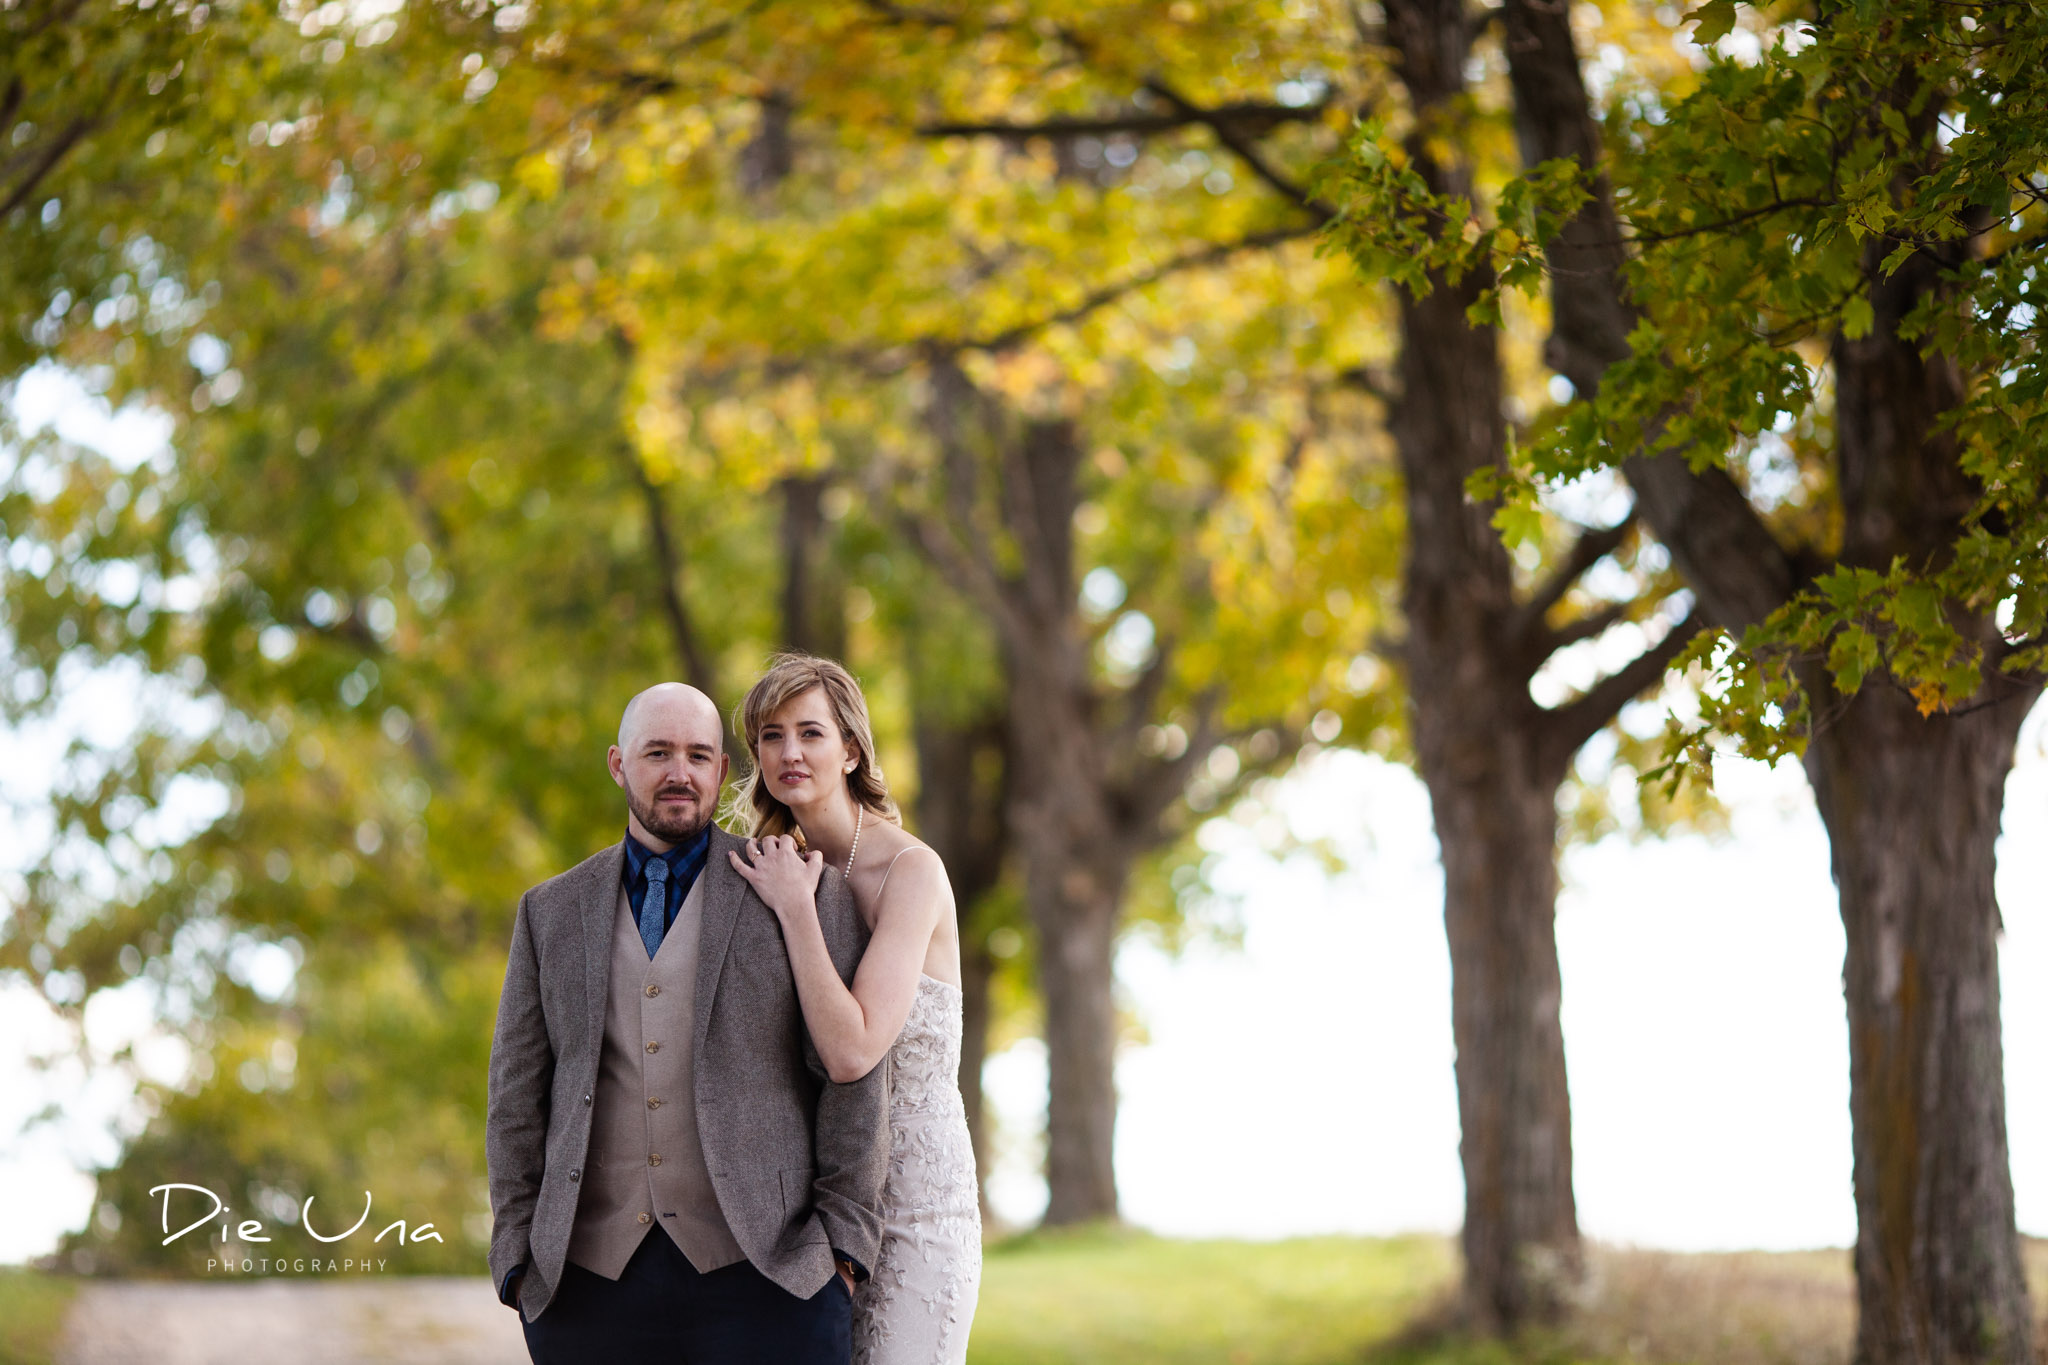 bride hugging groom from behind with yellow fall leaves in the background for wedding portrait.jpg